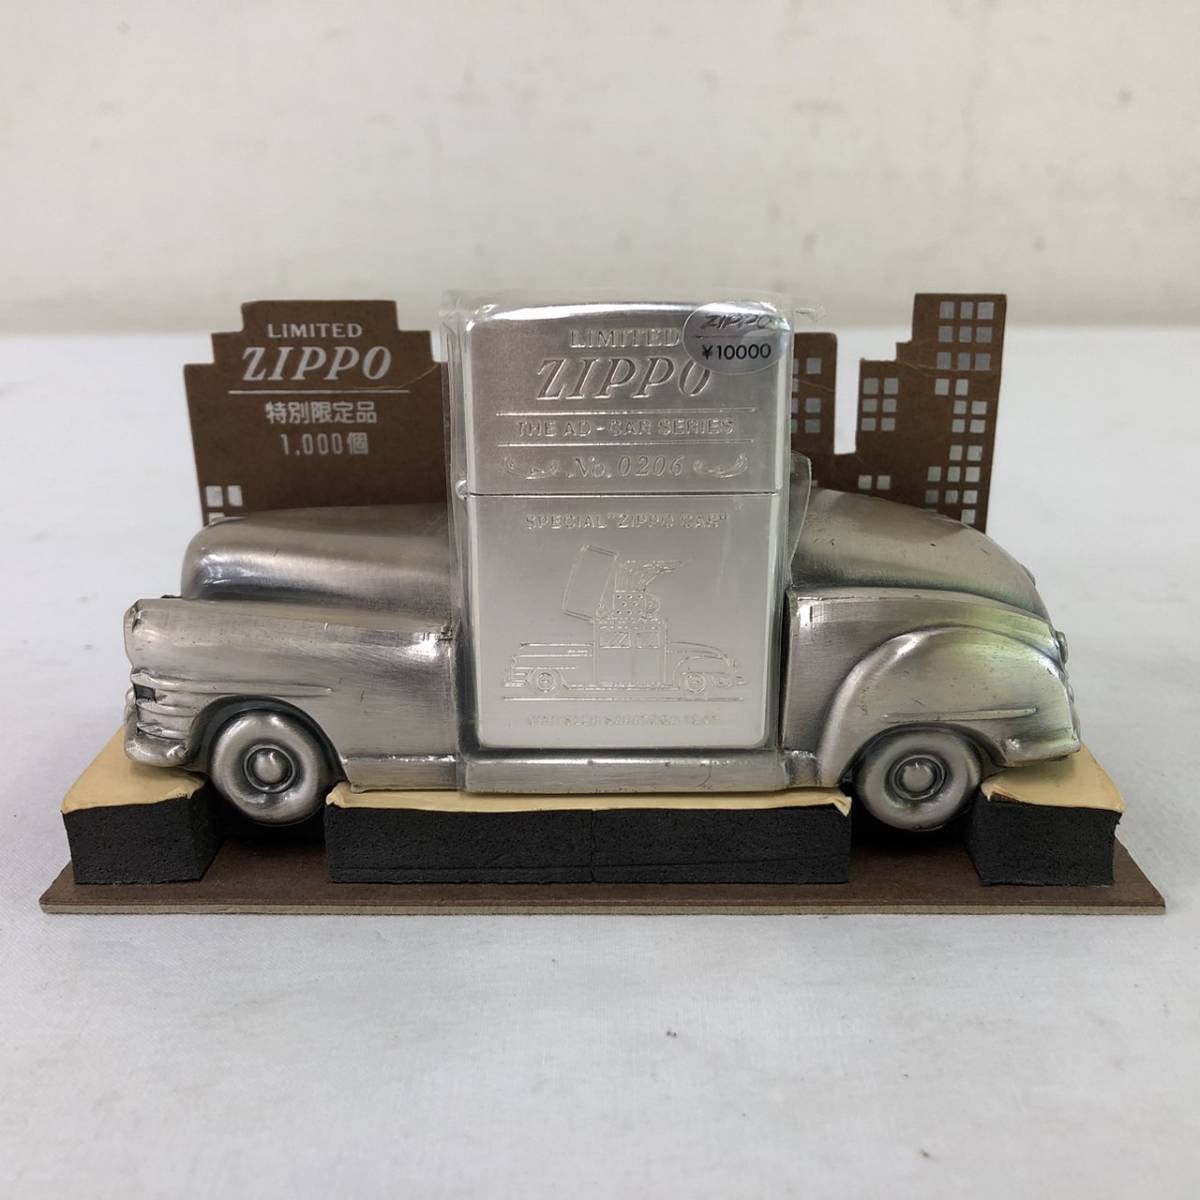 Y4981(104)-128/TY10000【名古屋】ZIPPO ジッポー LIMITED THE AD-CAR SERIES No.0206 SPECIAL ZIPPO CAR_画像1